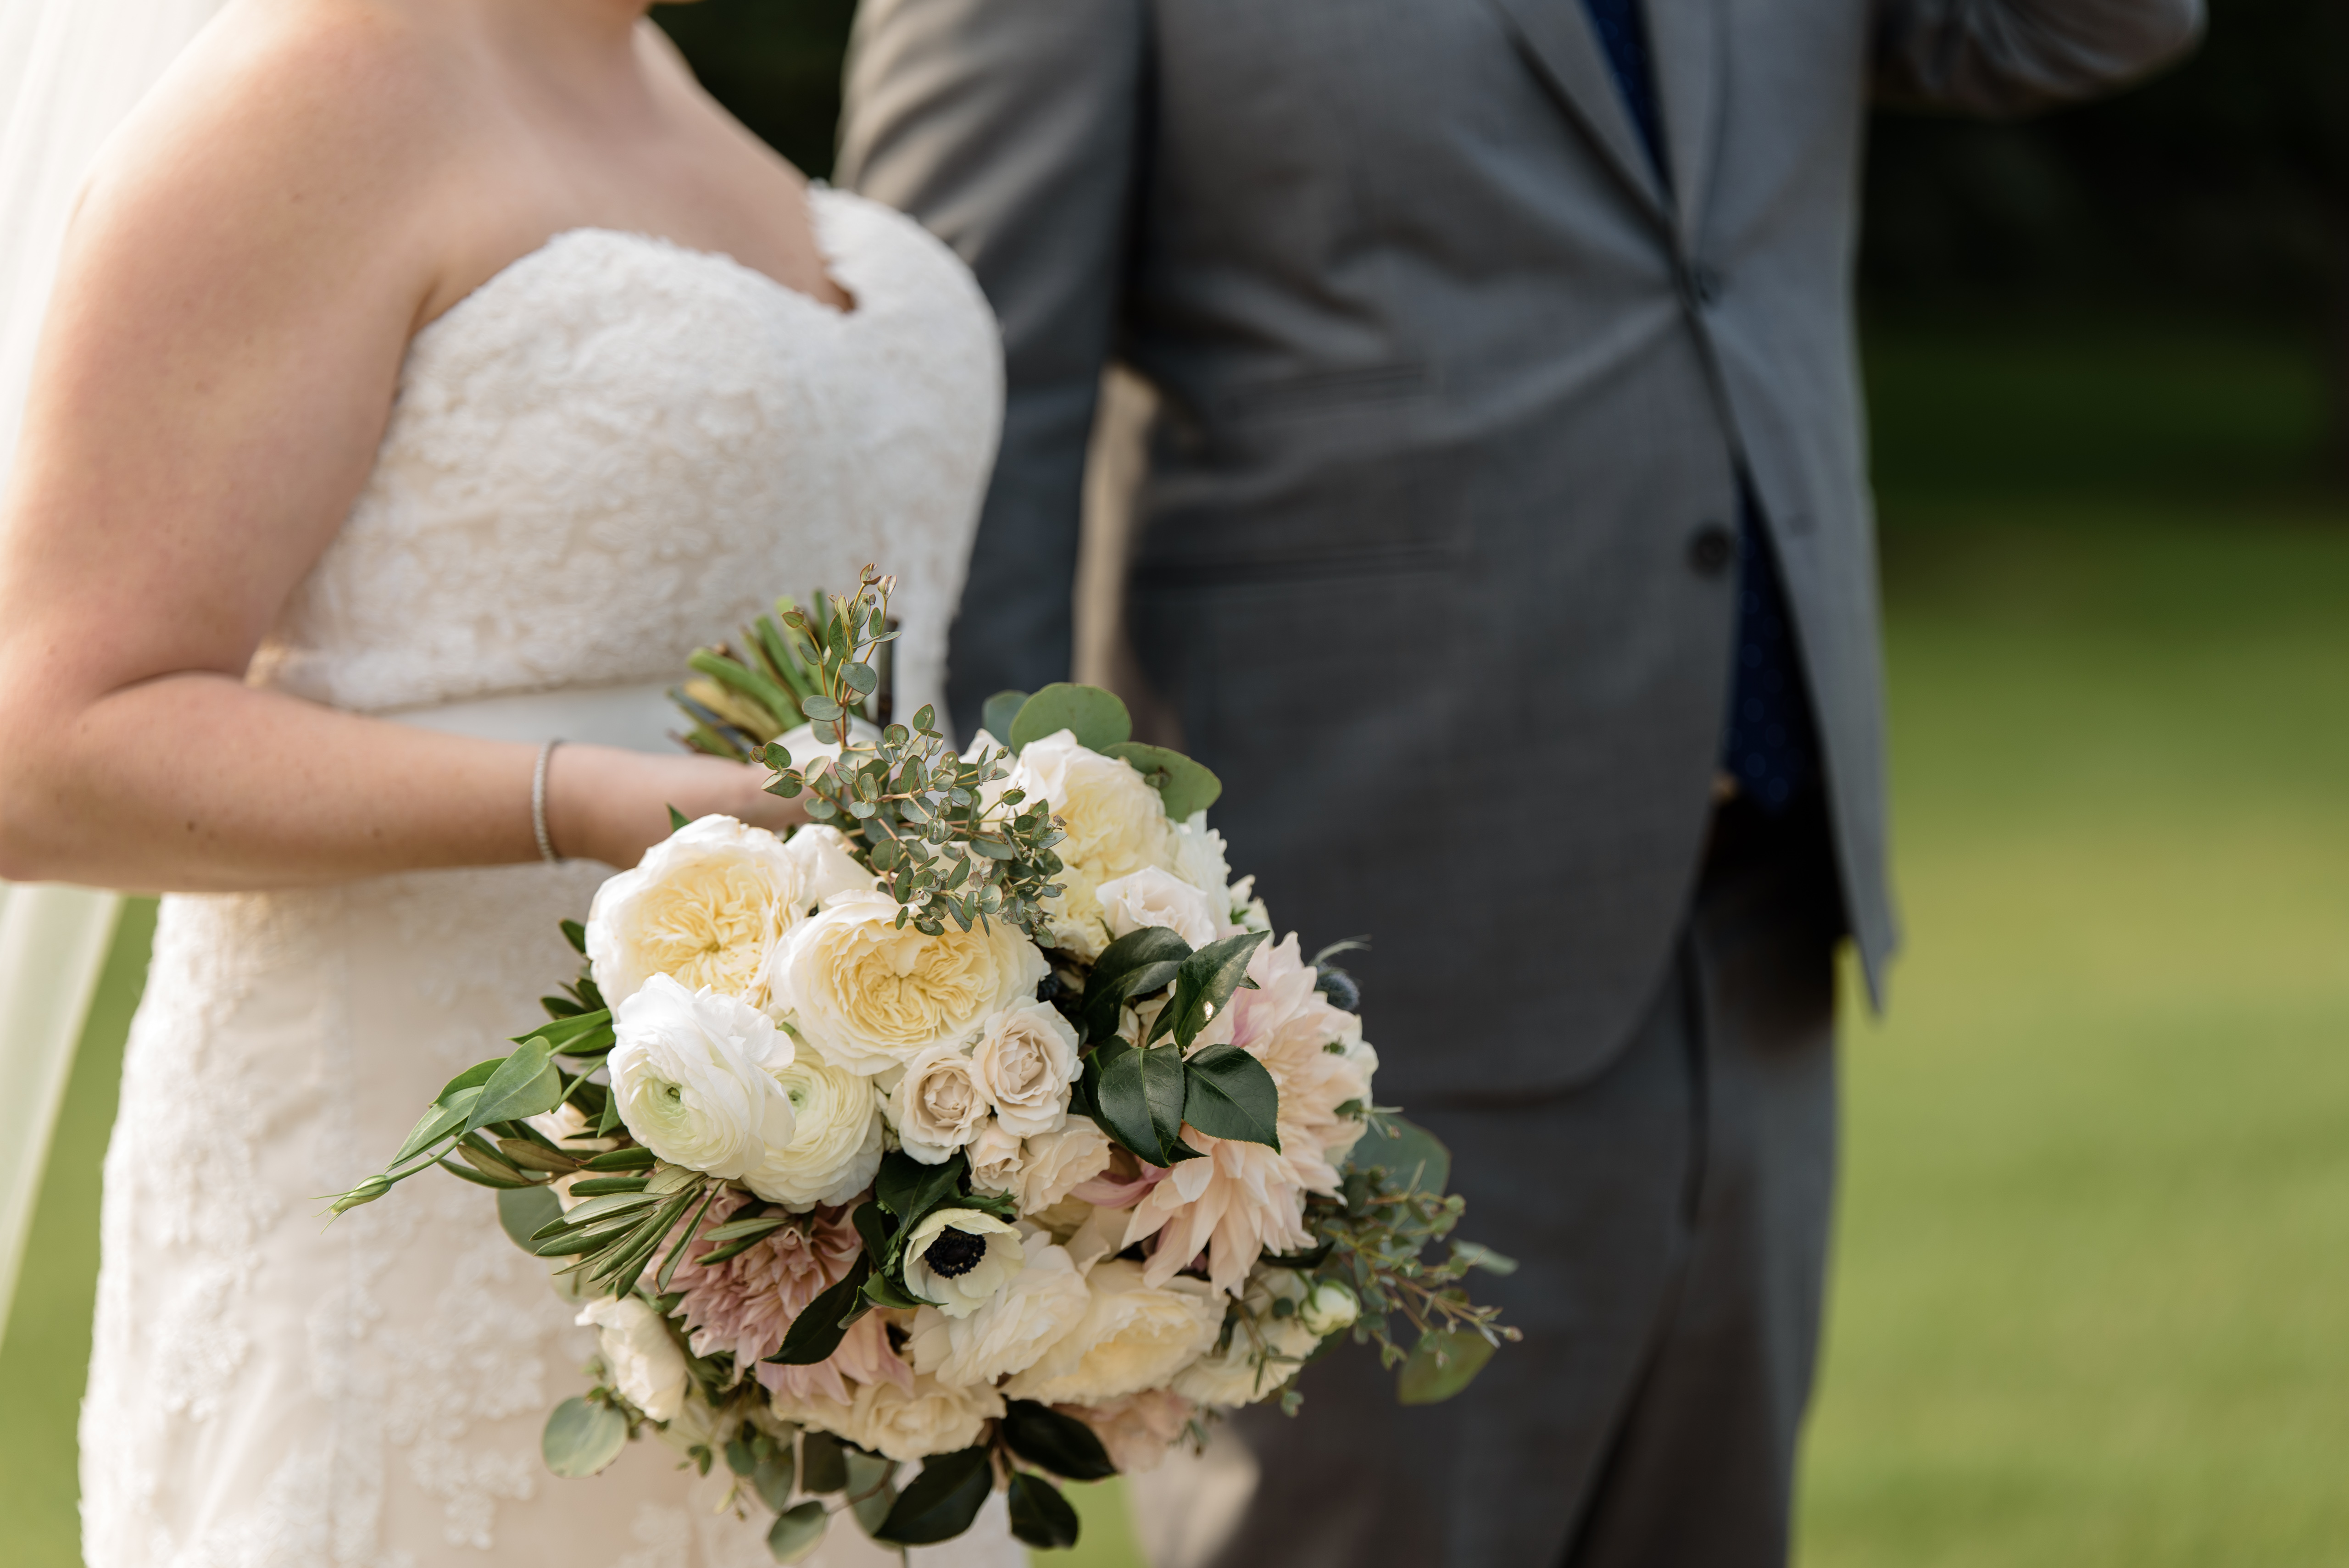 Bride and groom walking with bouquet of ranunculus, garden roses, and dahlias